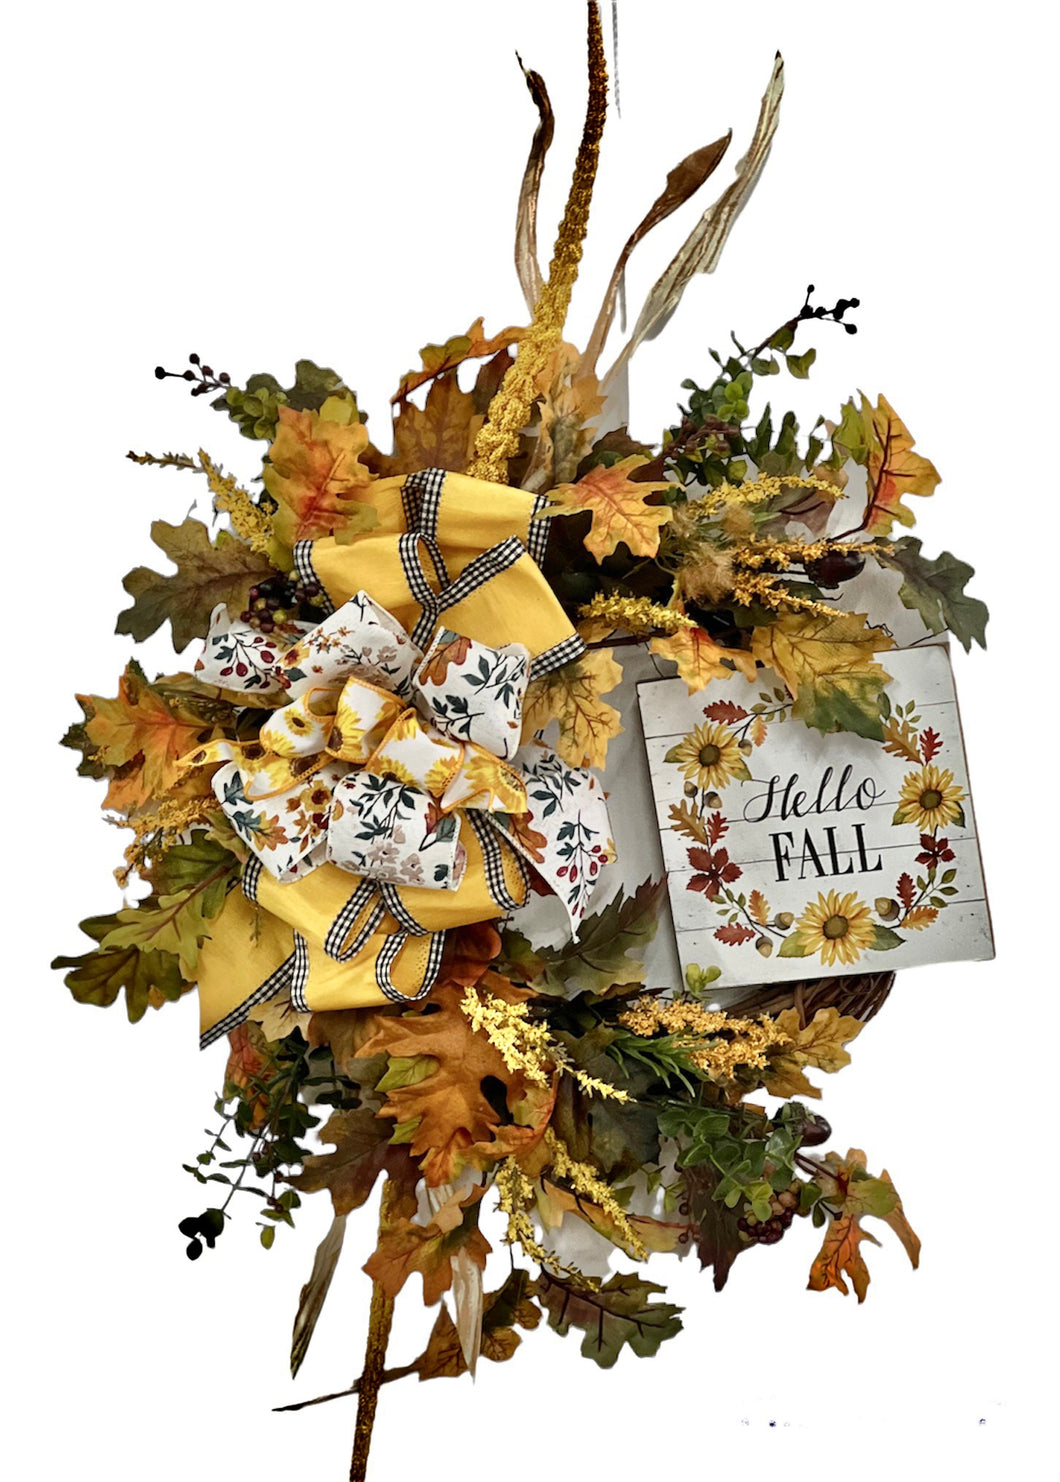 Gold and Green Silk Floral Fall Wreath with Hello Fall Plaque/Harv242